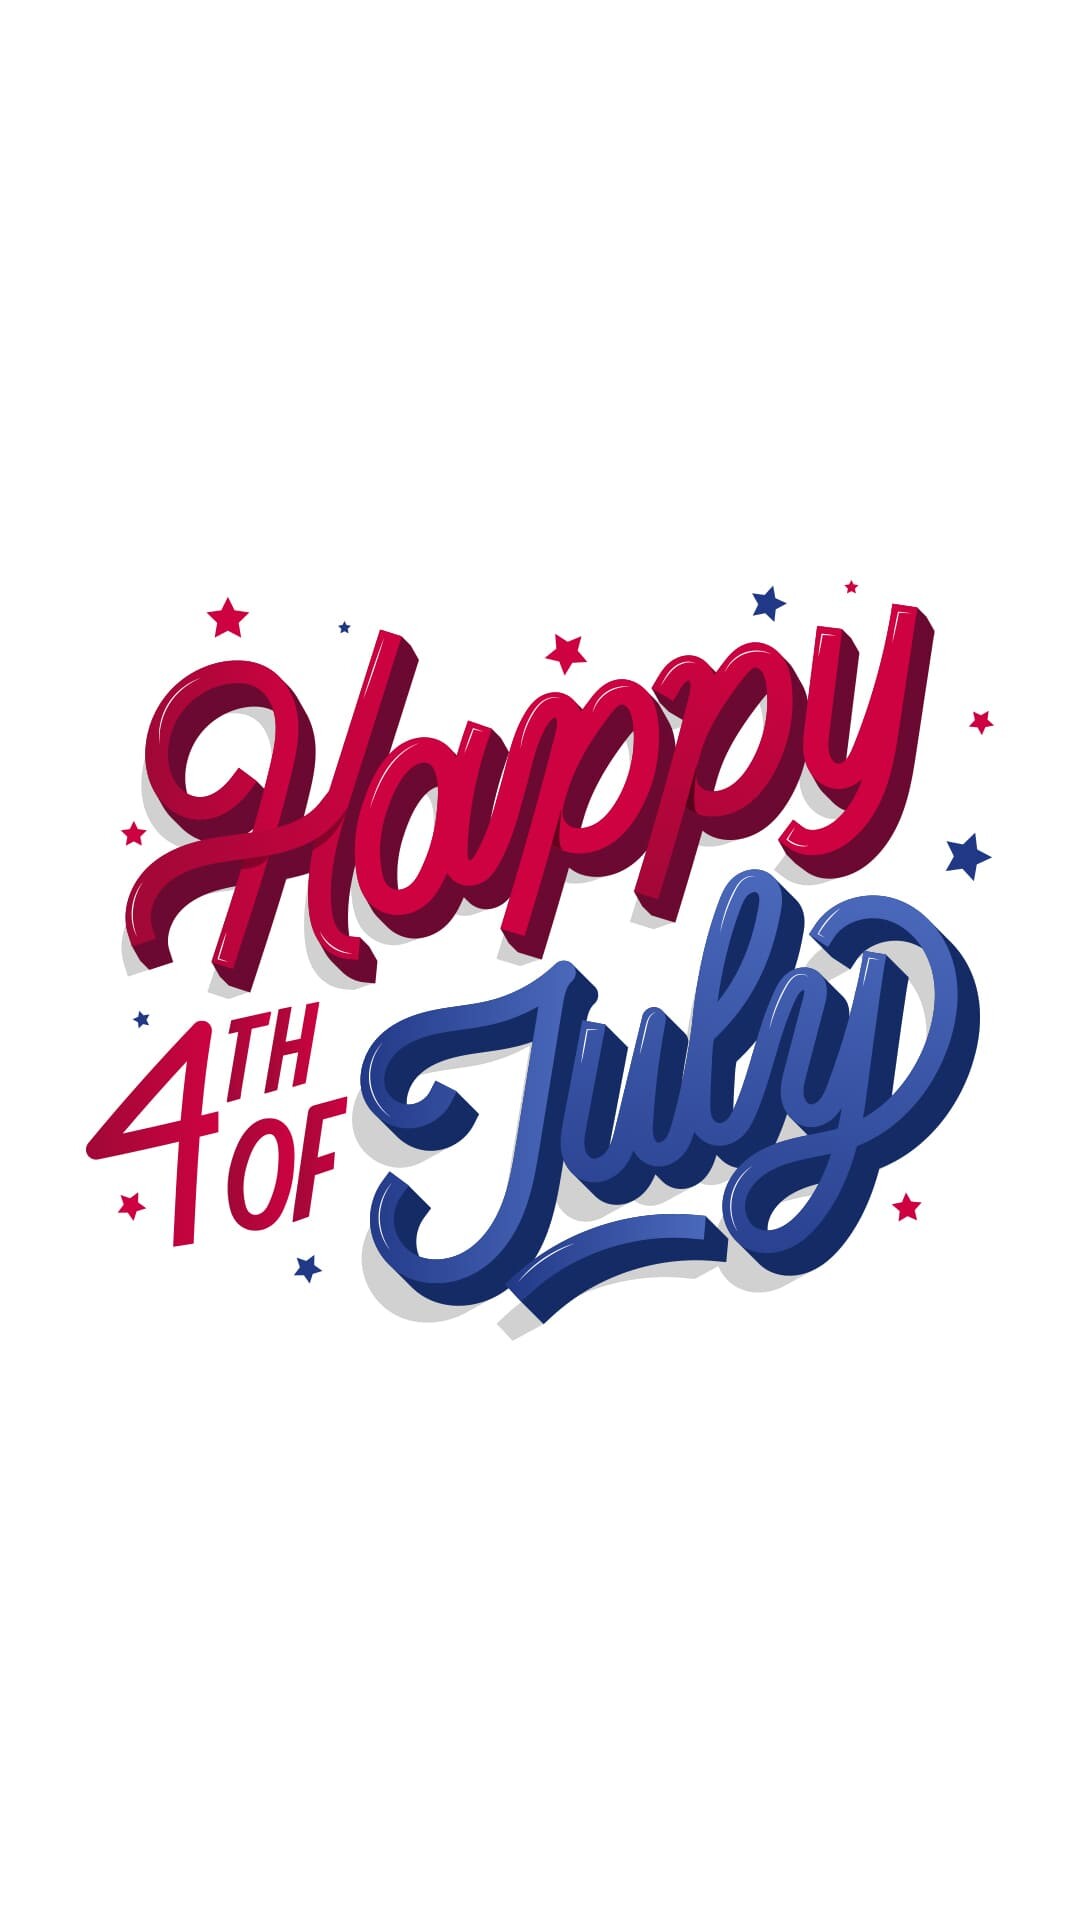 4th of July: A day of family celebrations with picnics and barbecues. 1080x1920 Full HD Background.